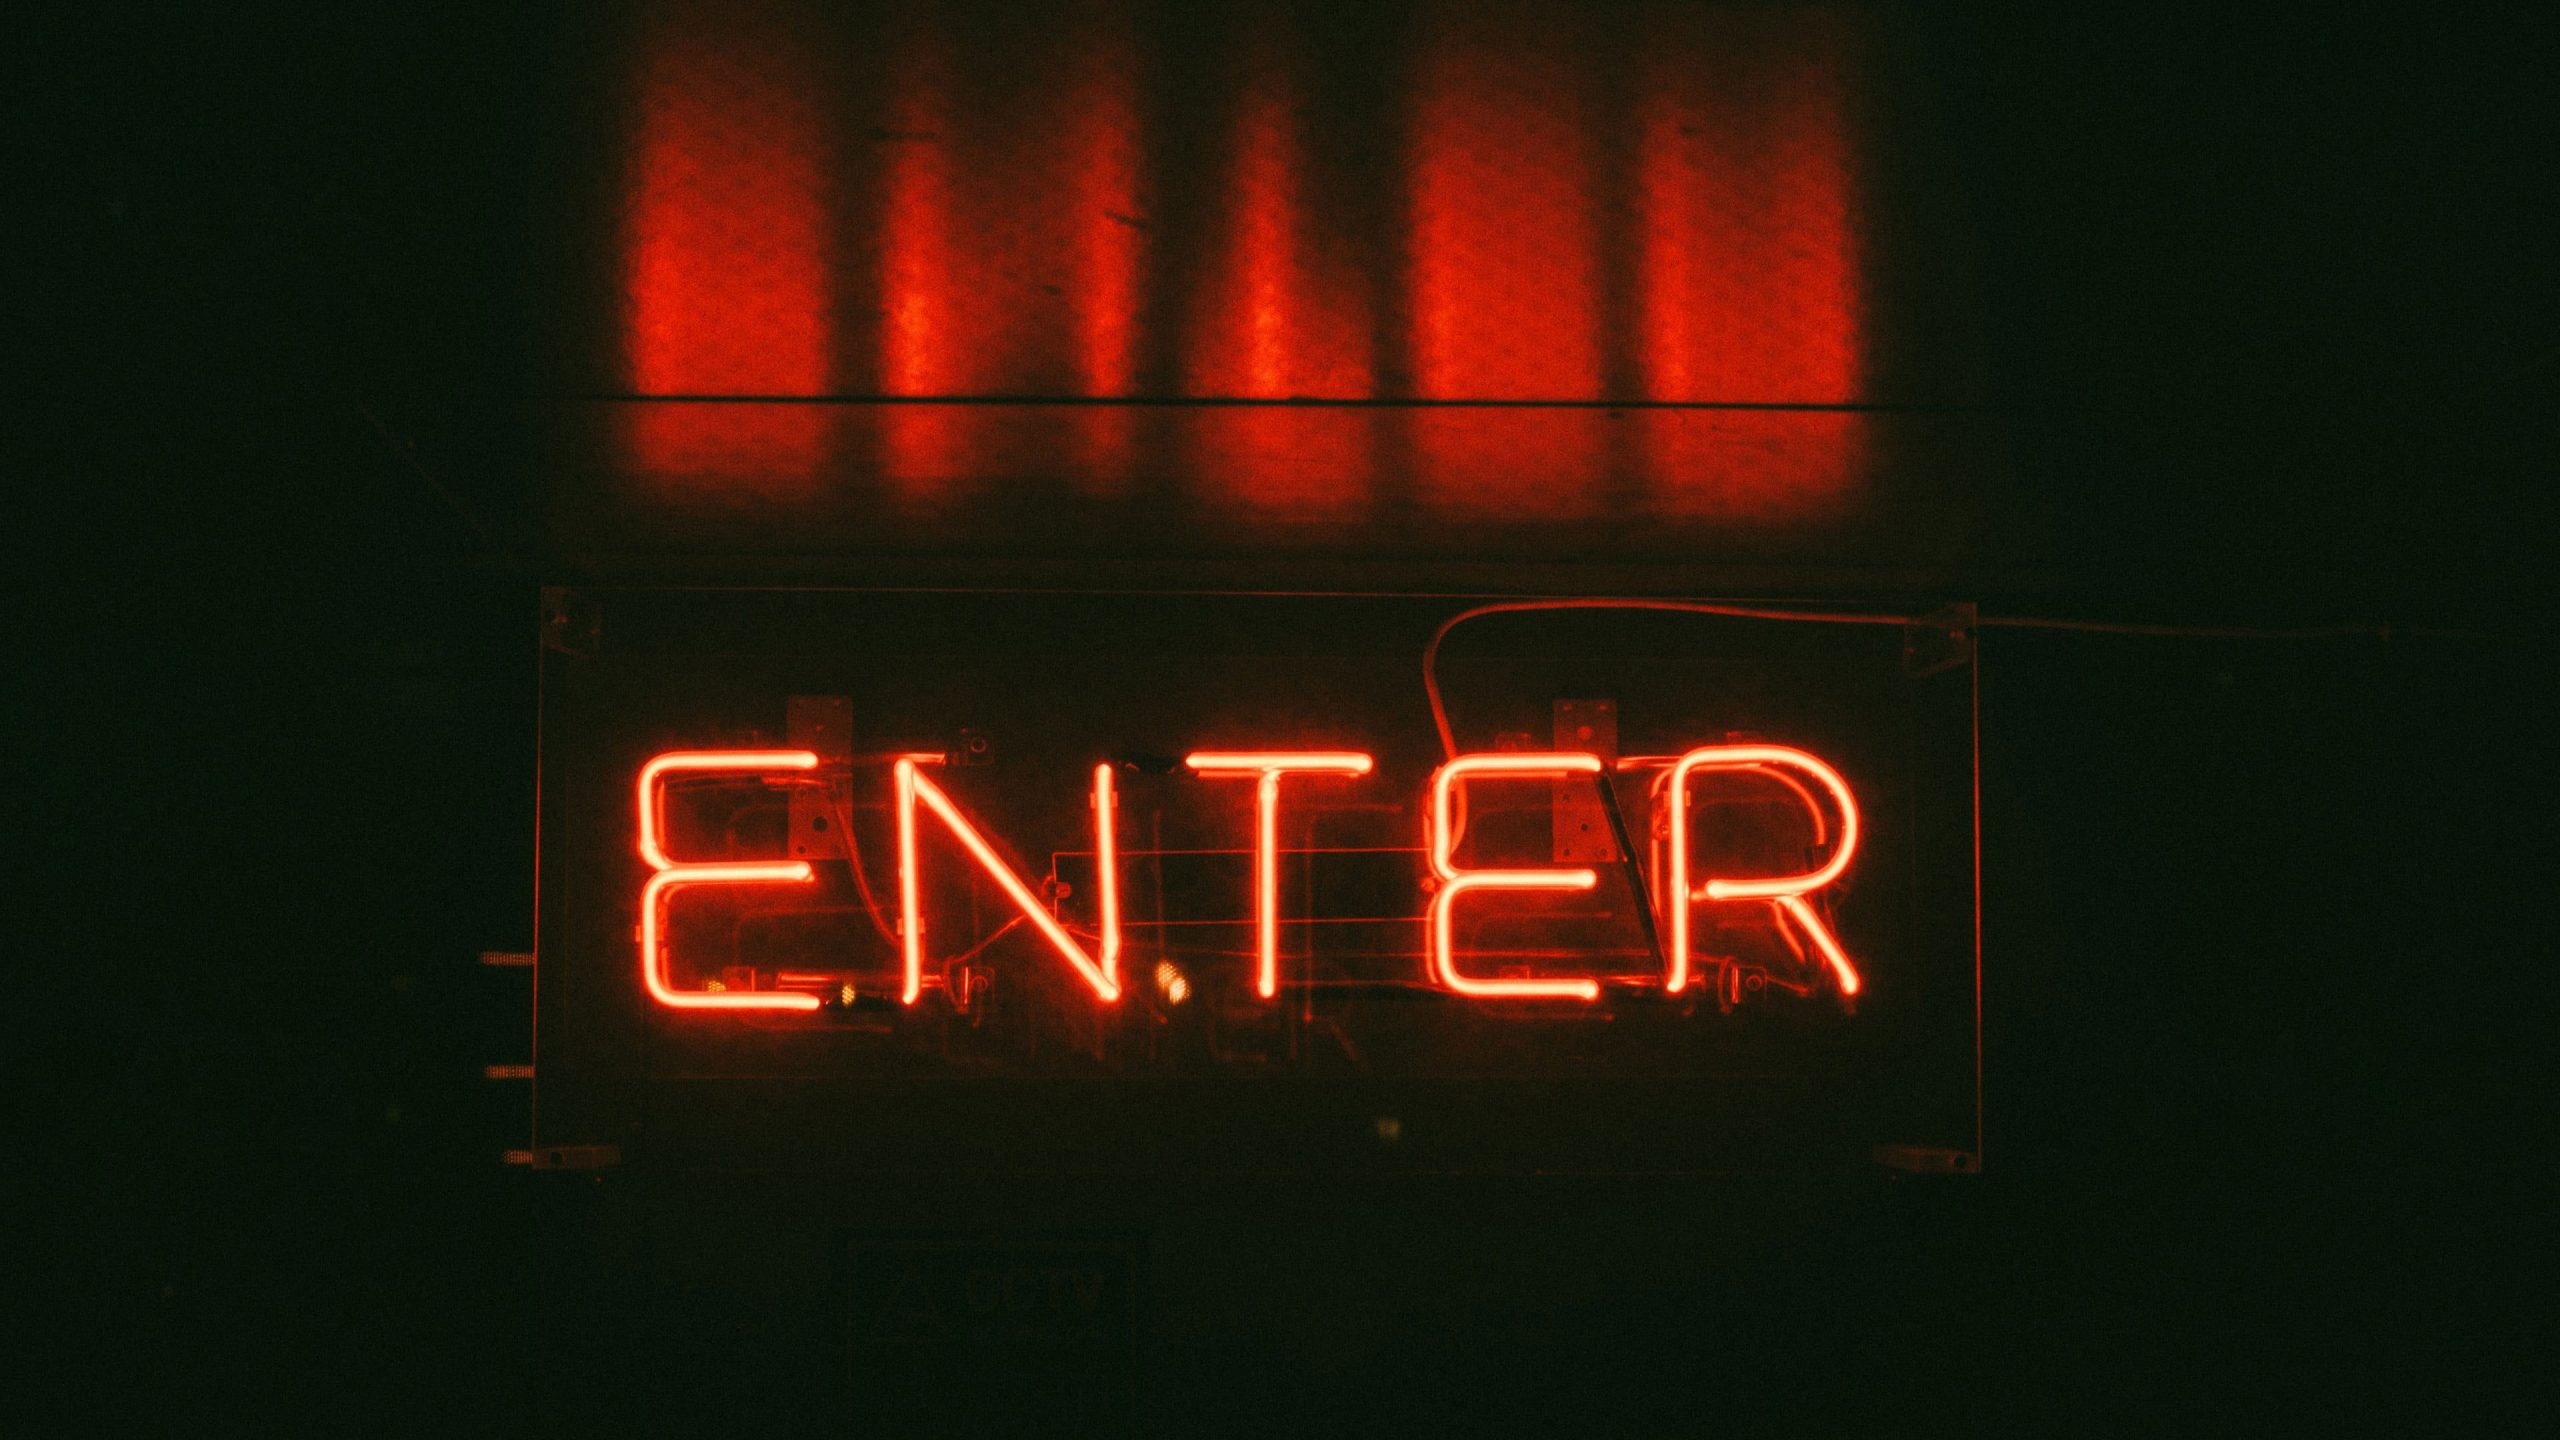 Red Enter neon light signage wallpaper, photography, signs